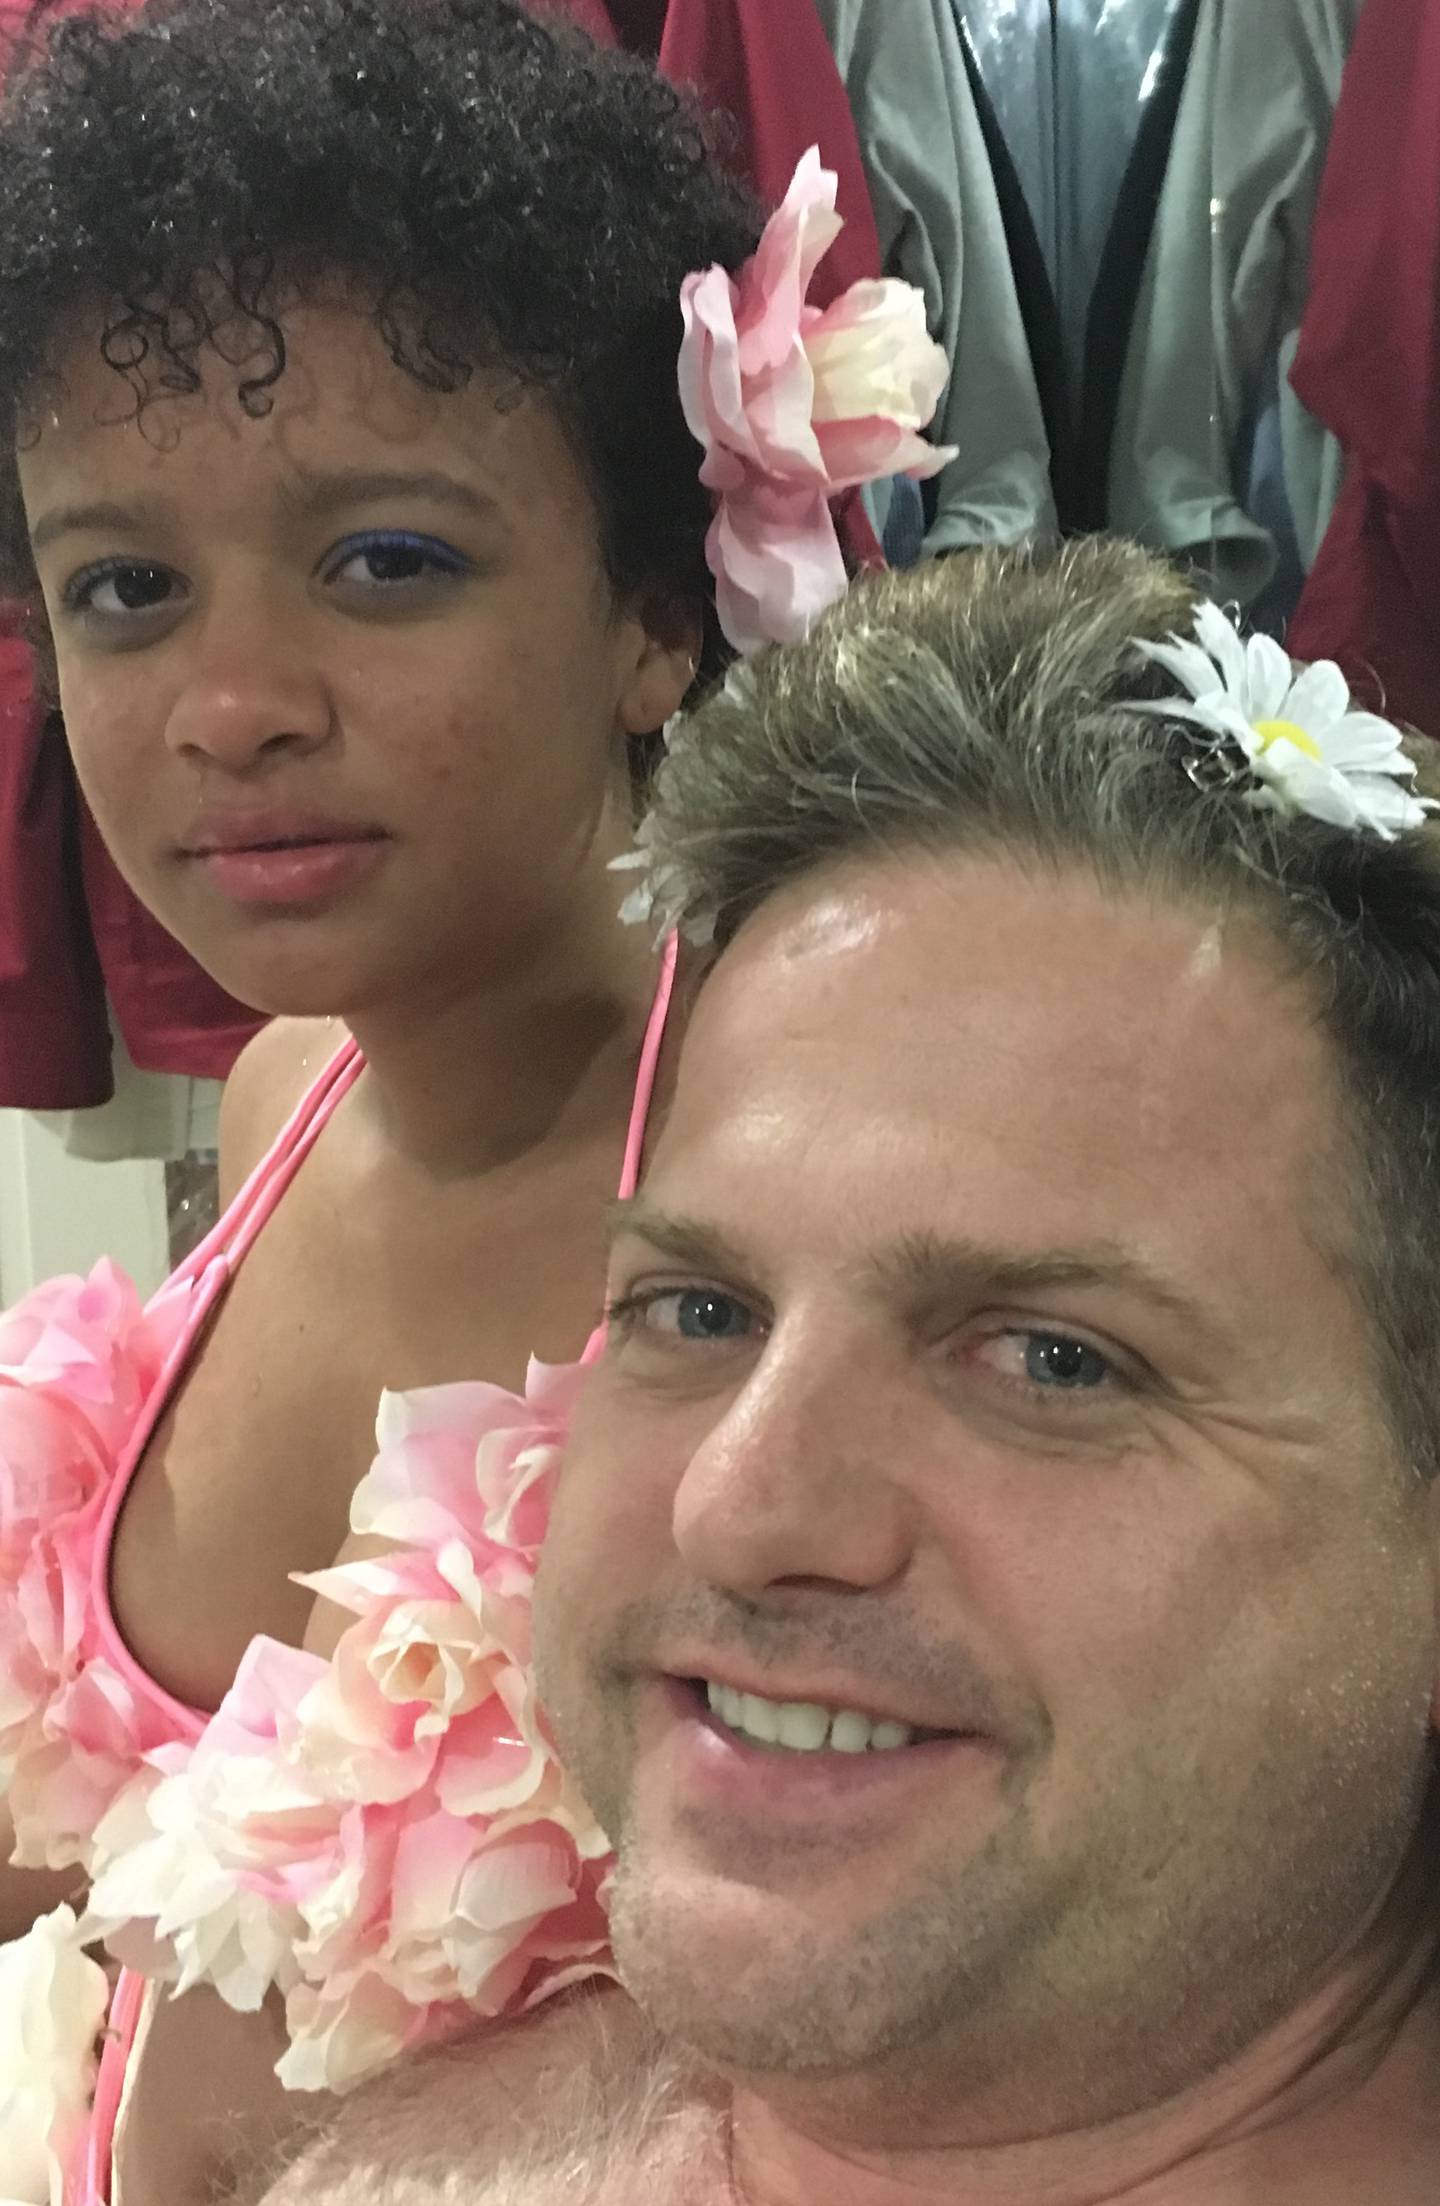 Sophie Reeder spent her last day at home gluing artificial flowers around her room. She put a daisy in her father Patrick Reeder’s hair for this selfie.